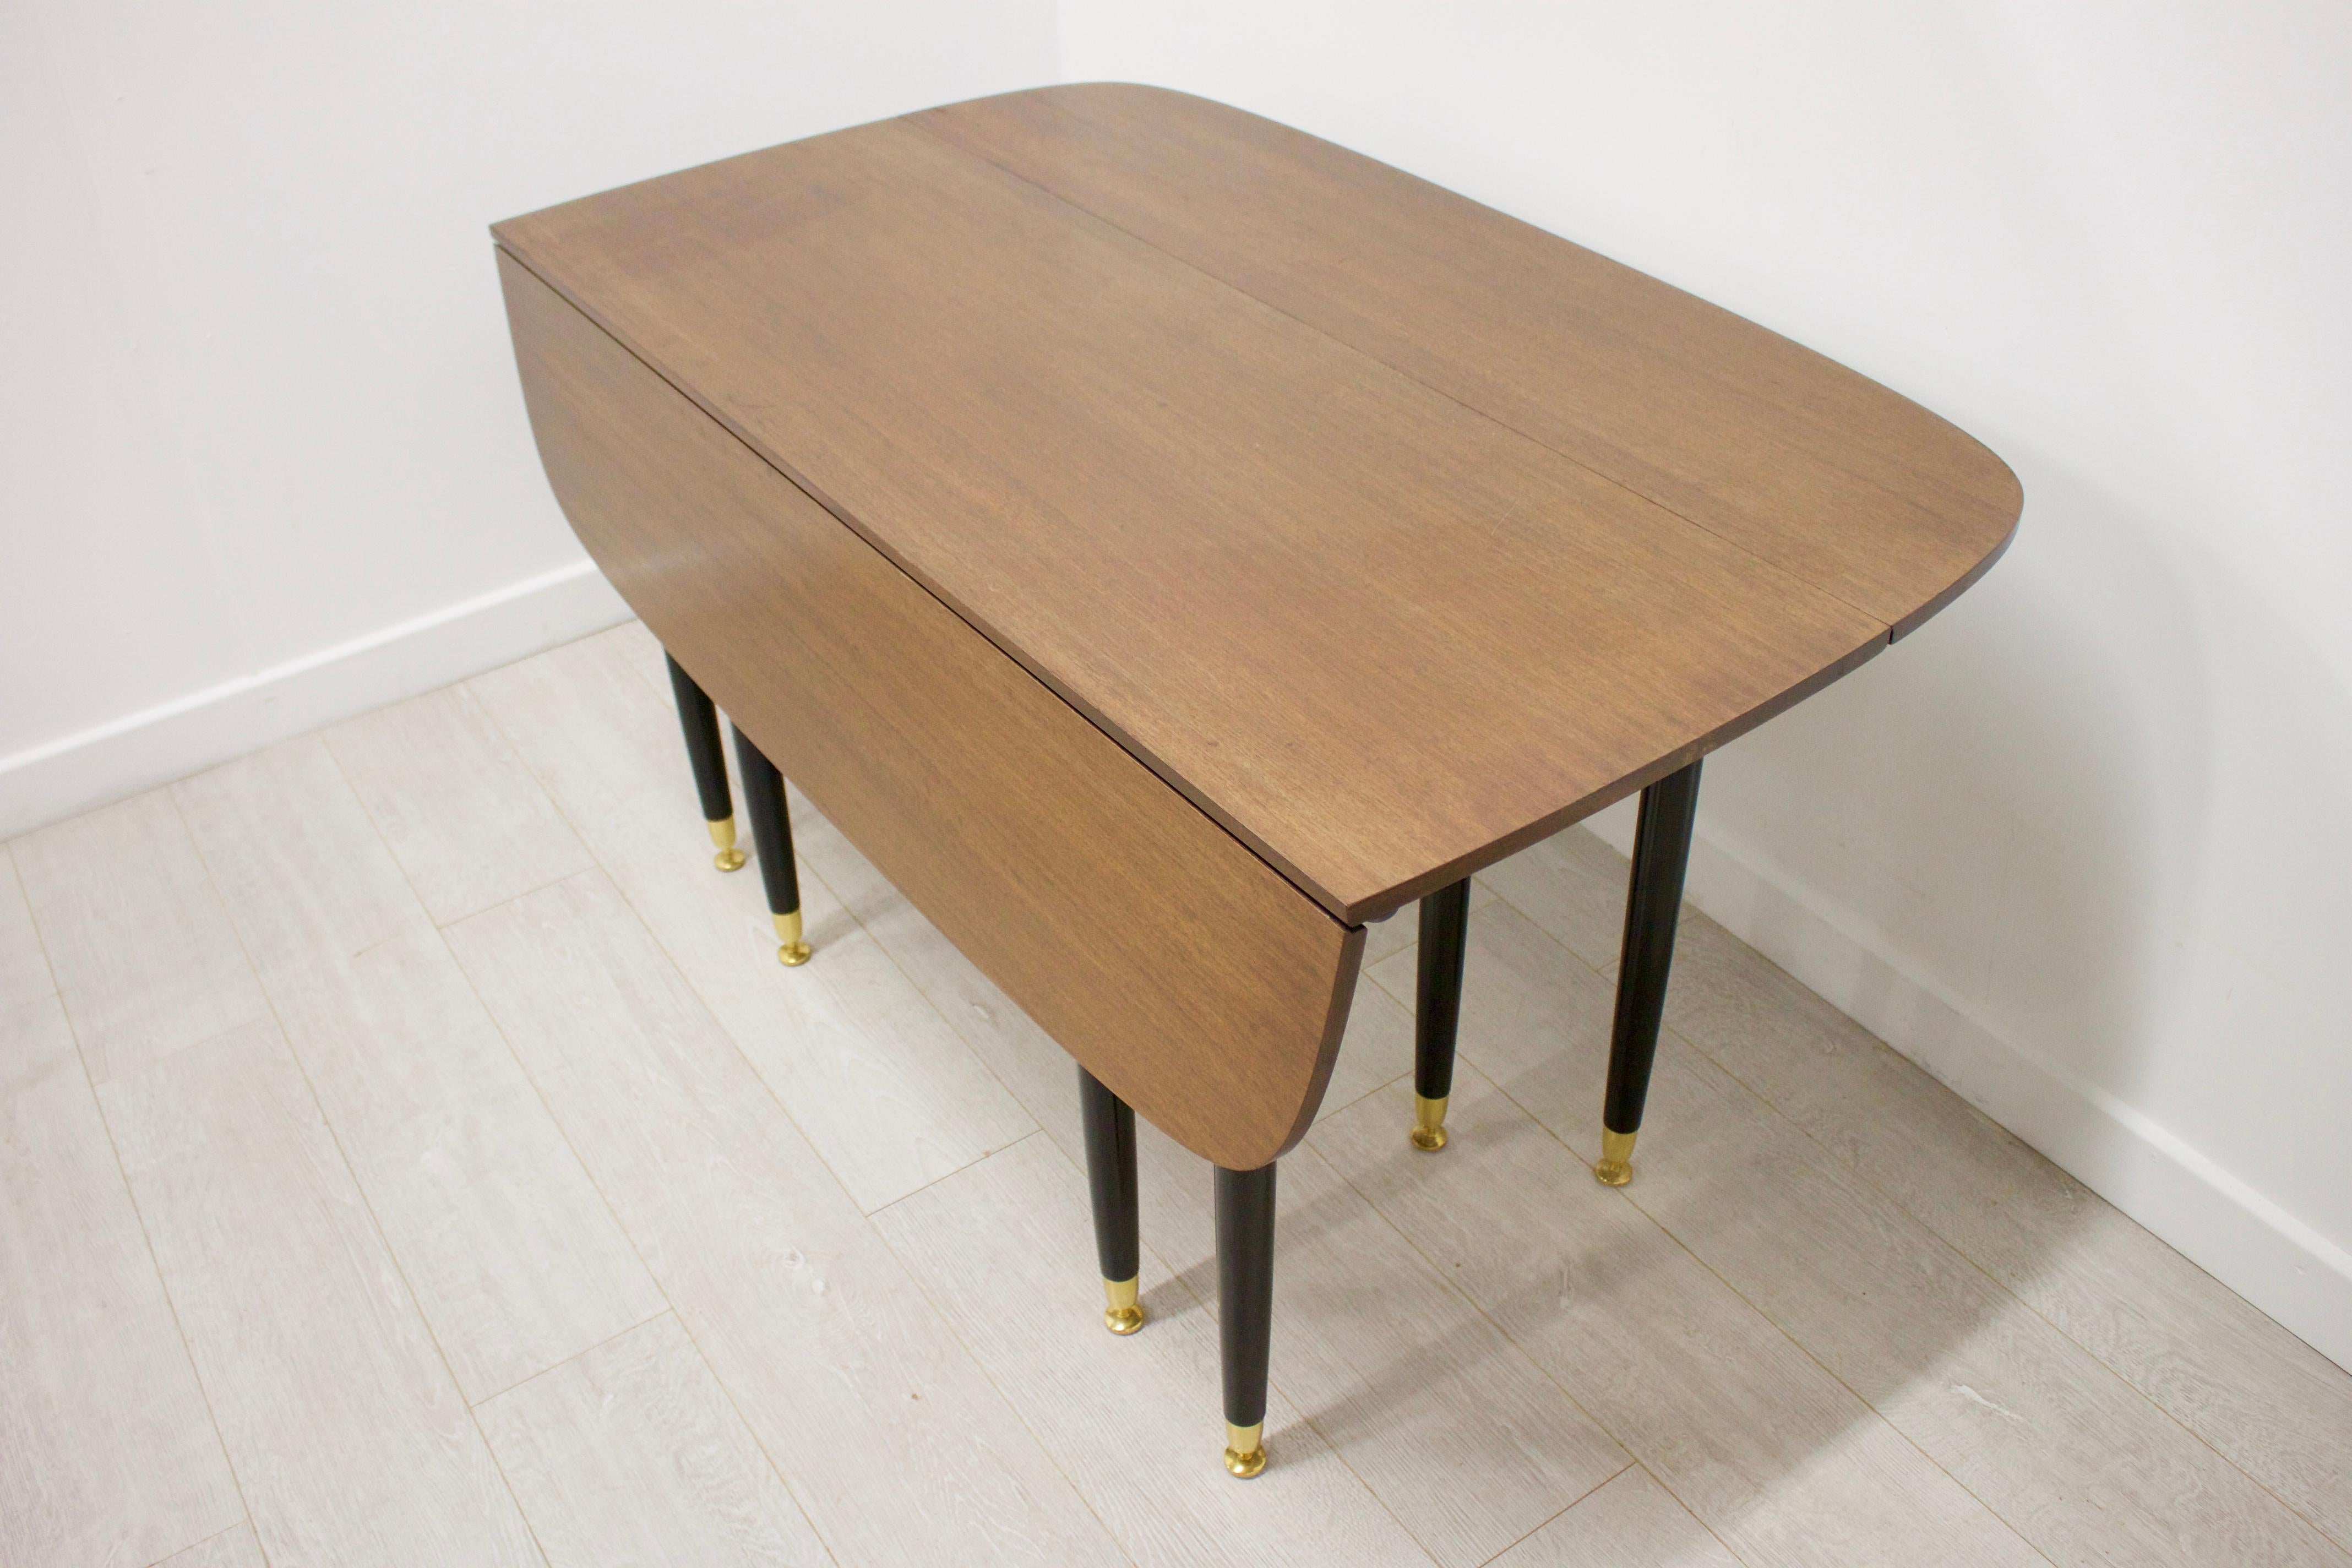 British Midcentury Tola Extending Dining Table and 4 Chairs by G-Plan, 1960s